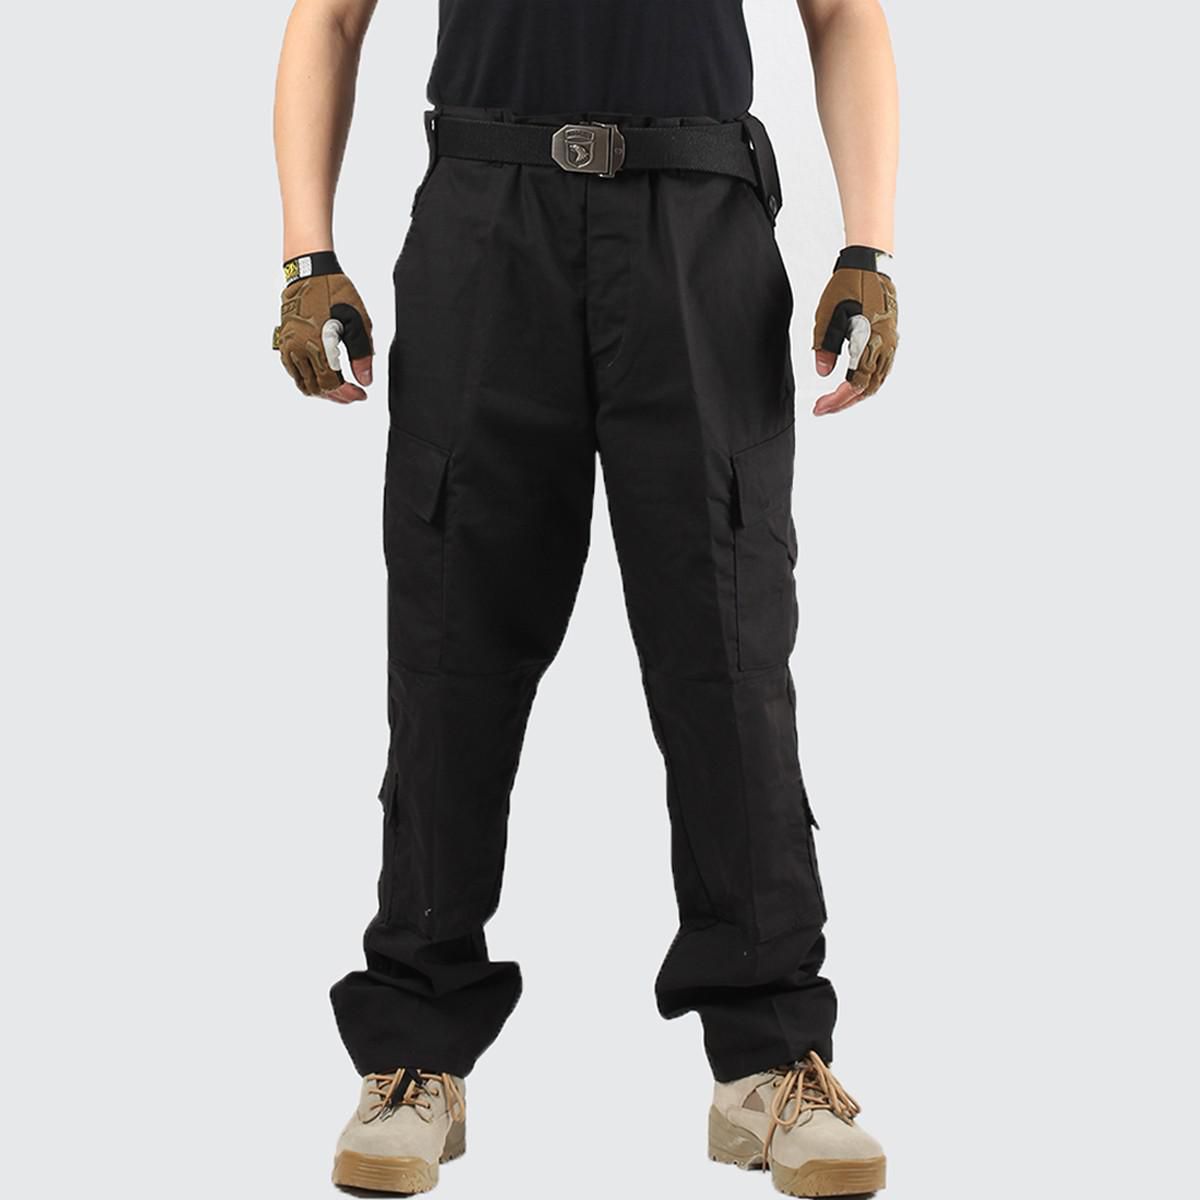 Funky Mens Kids Army Combat Work Trousers Pants Combats Cargo Pockets Heavy Duty